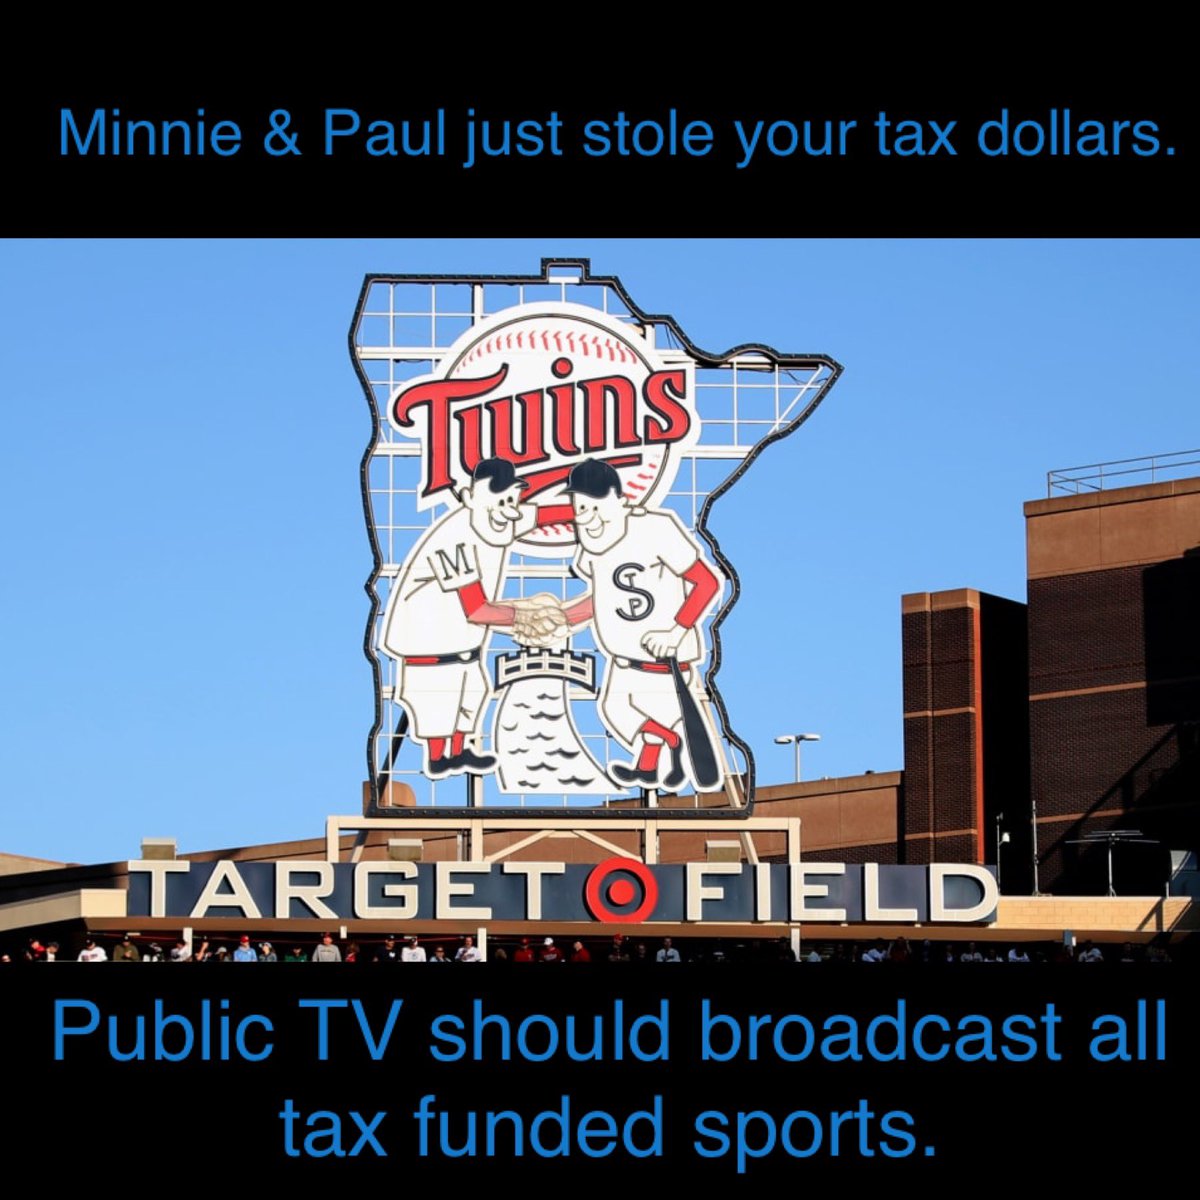 @DeRushaJ Target field was funded 260 million by Hennepin County with an additional 3.5 by @MnDOT My 102 year old grandma needs to see her @twins play. @tpt should broadcast all tax funded games. @GovTimWalz @AGEllison should sue all those involved for good faith breach of contract.